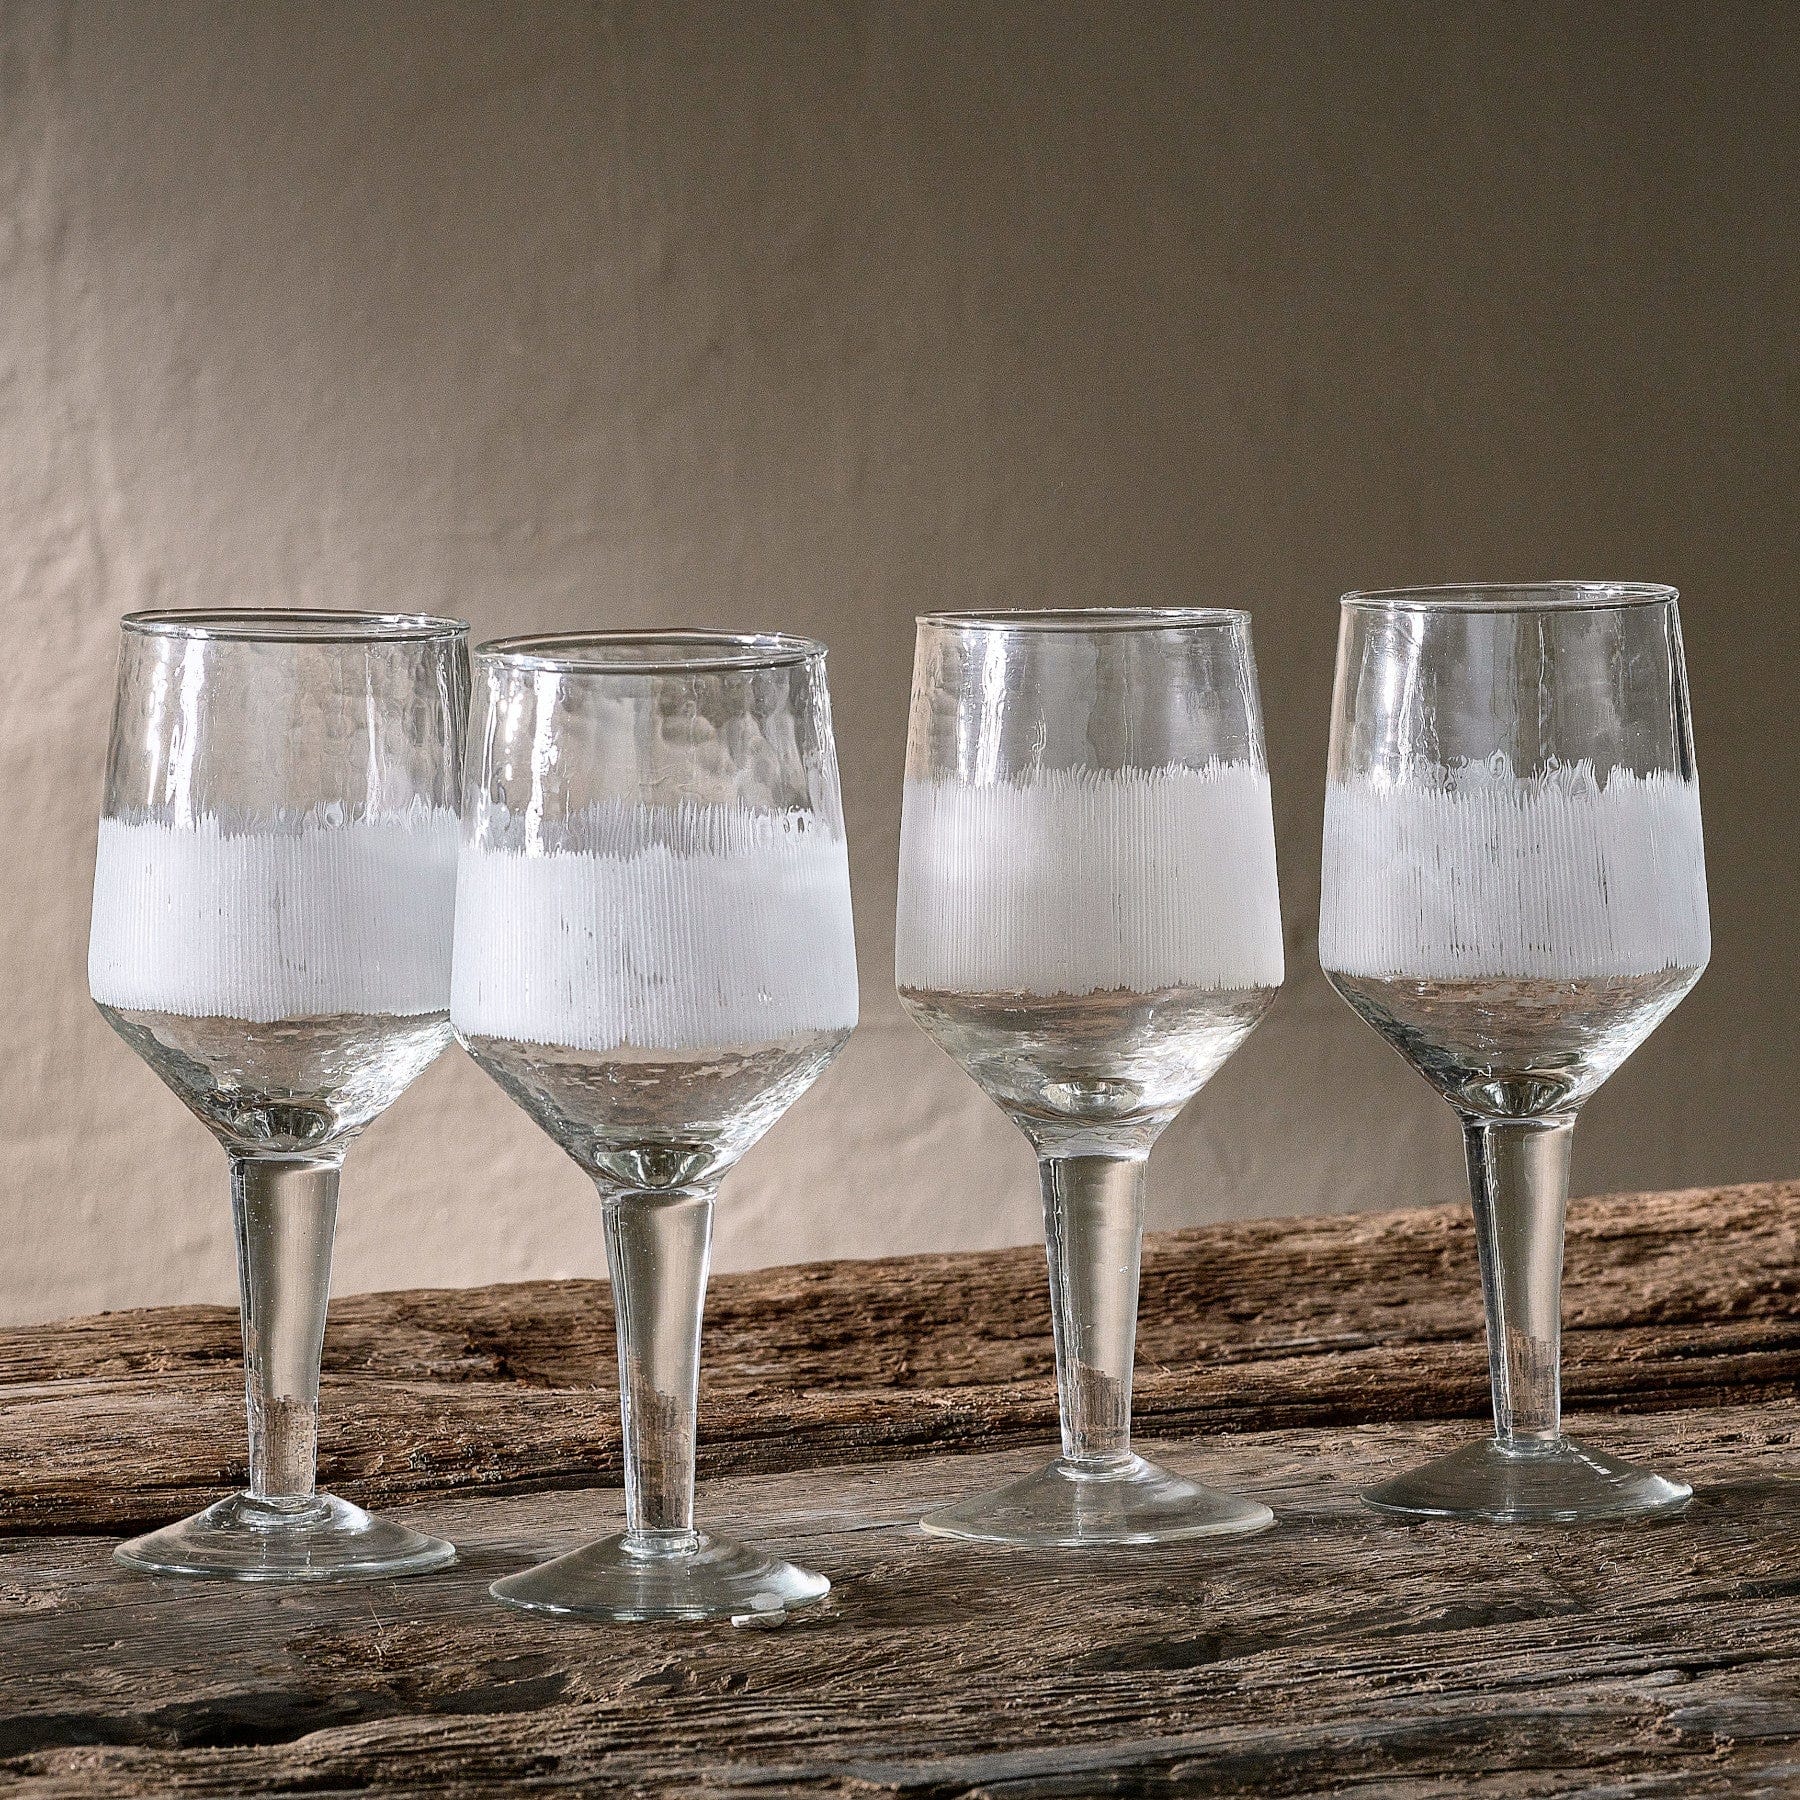 Four wine glasses with water on rustic wooden table against neutral background, glasses with condensation, still life, glassware concept